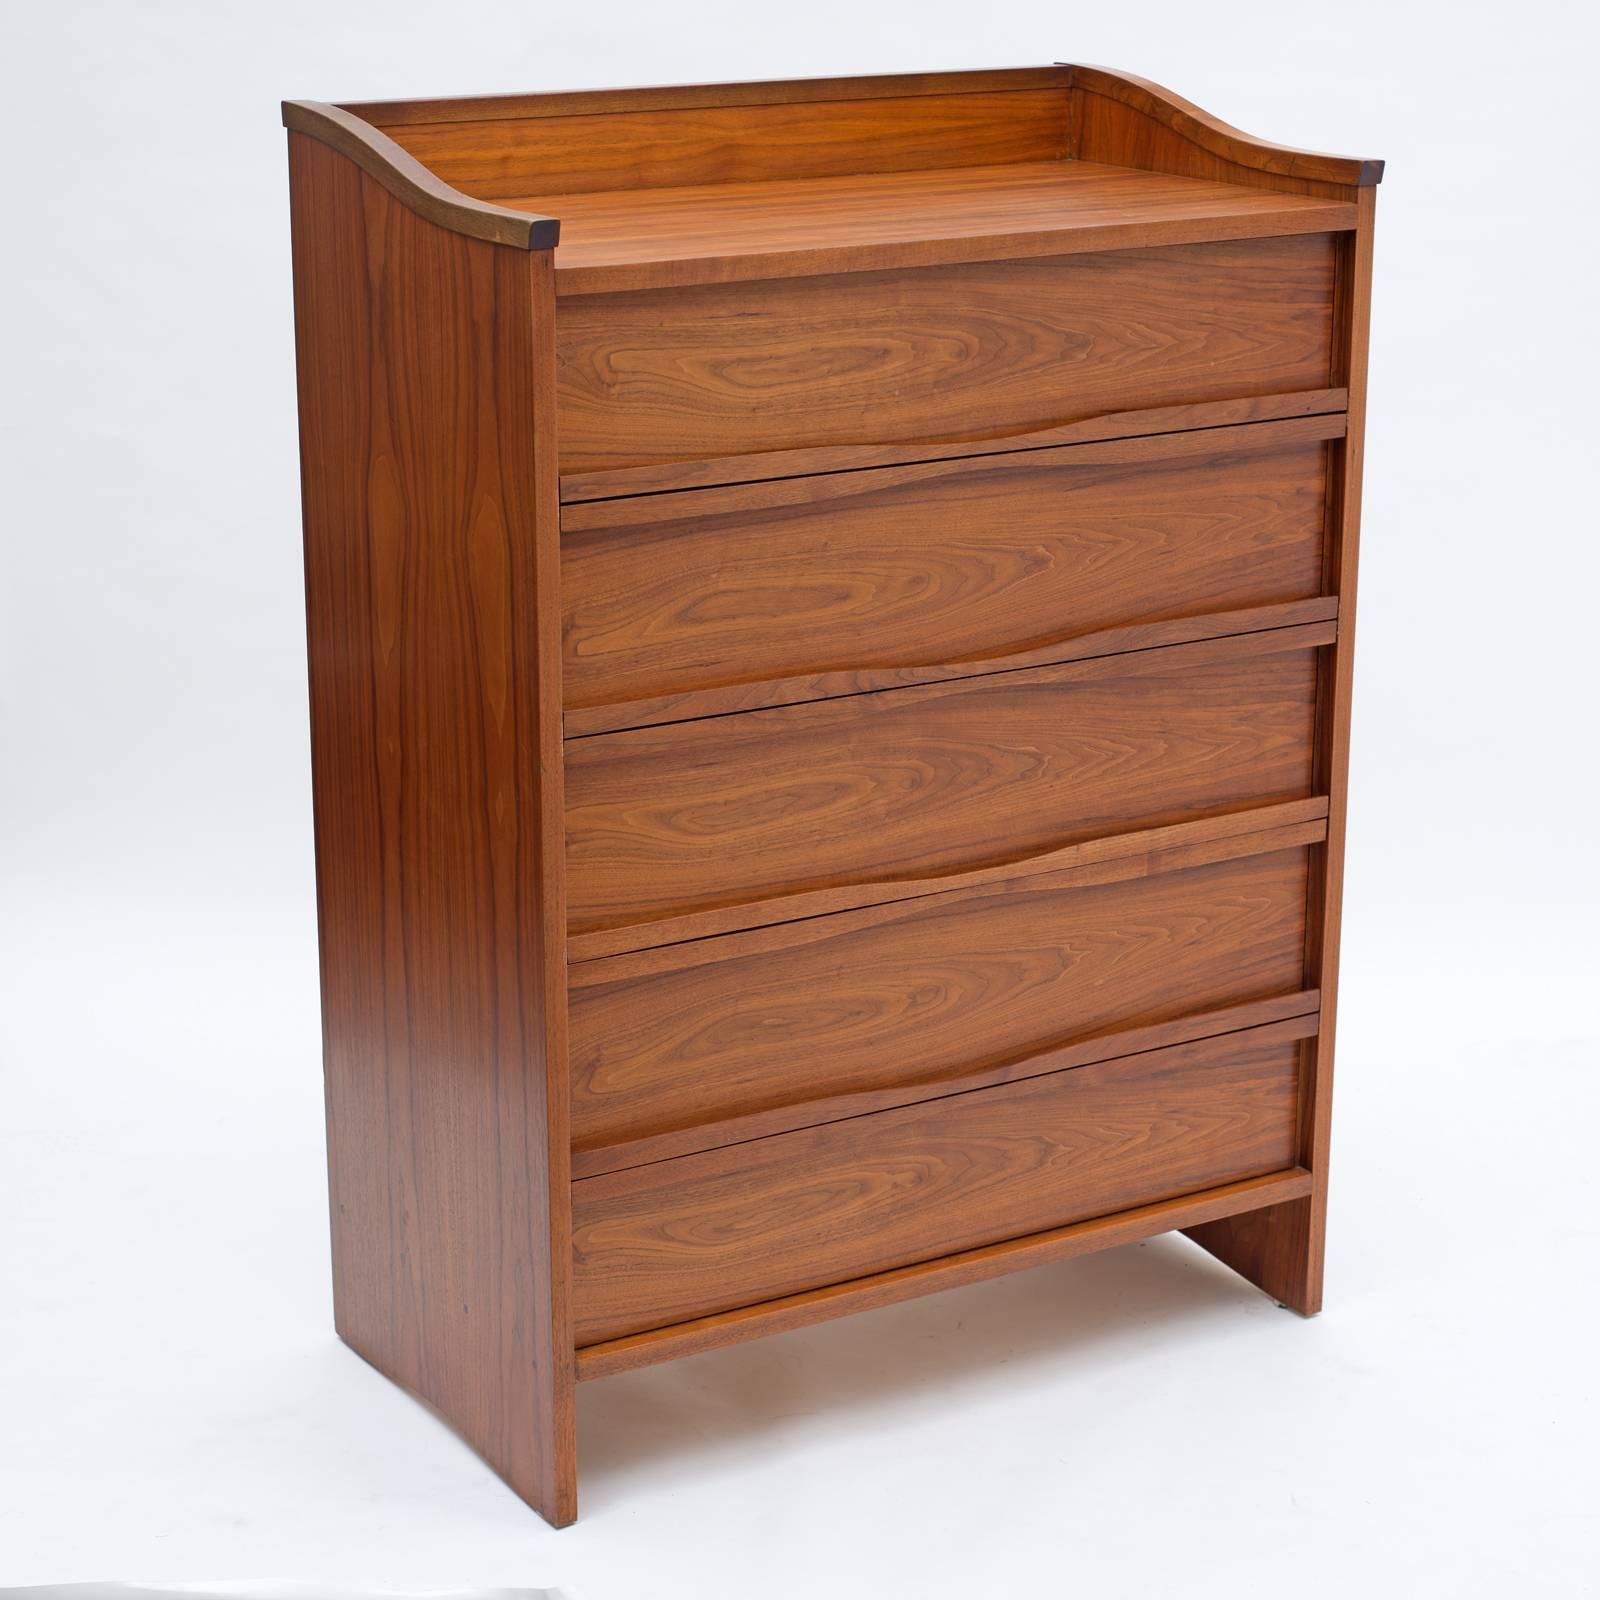 A beautiful design with subtle details typical of Nakashima. A very spacious chest with a relatively small footprint.